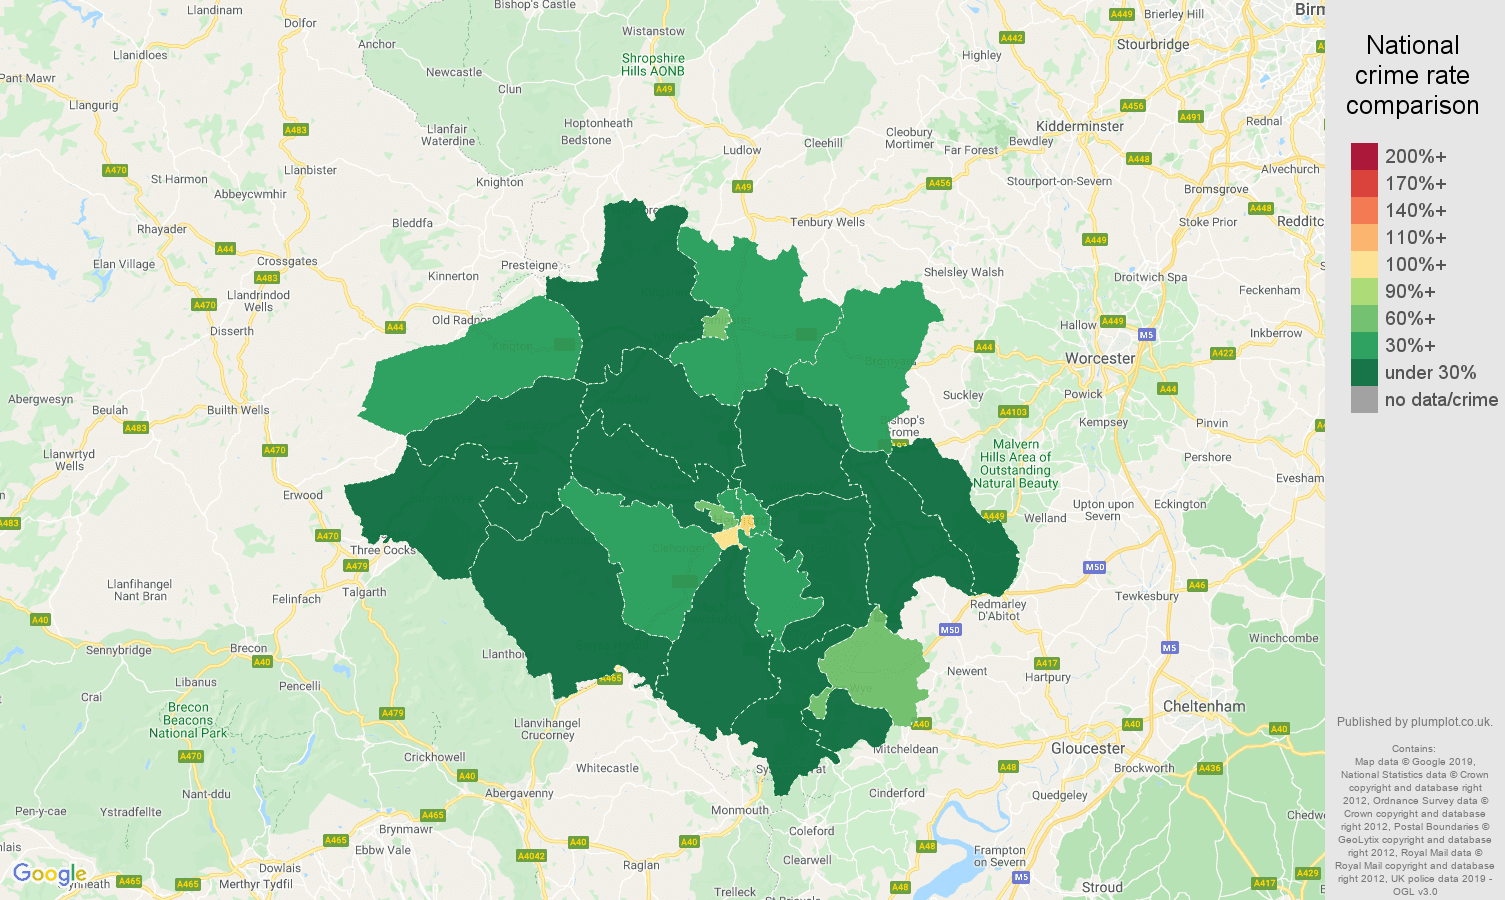 Hereford public order crime rate comparison map